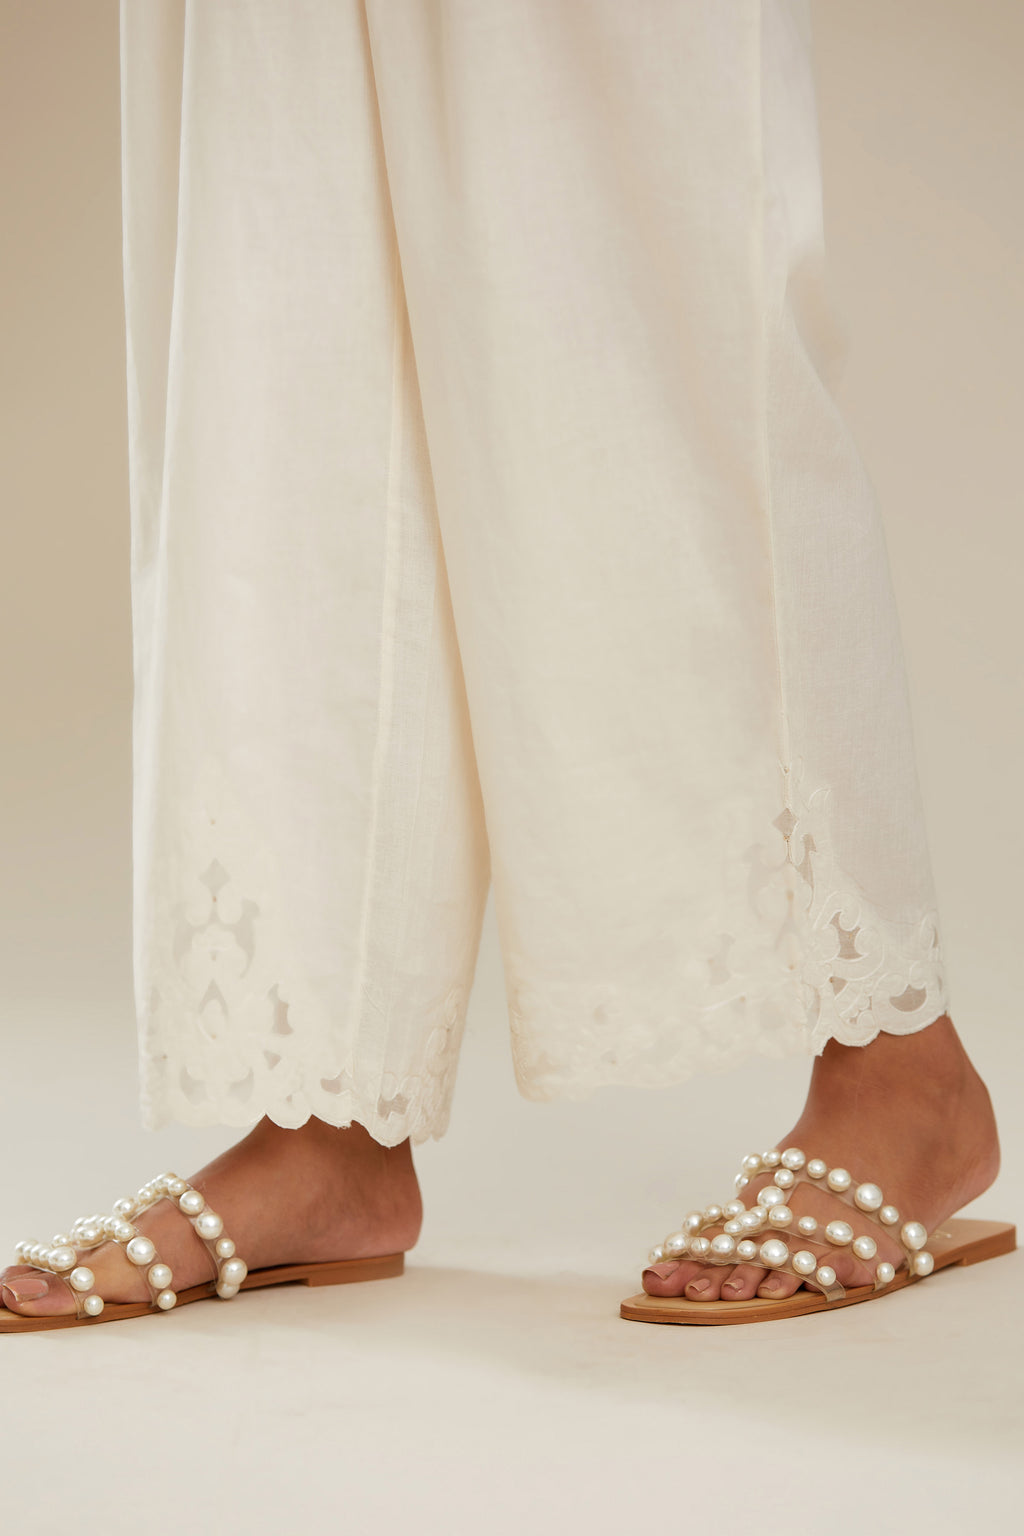 Off white cotton straight pants with appliqué detail at hem, highlighted with sequins. (Pants)